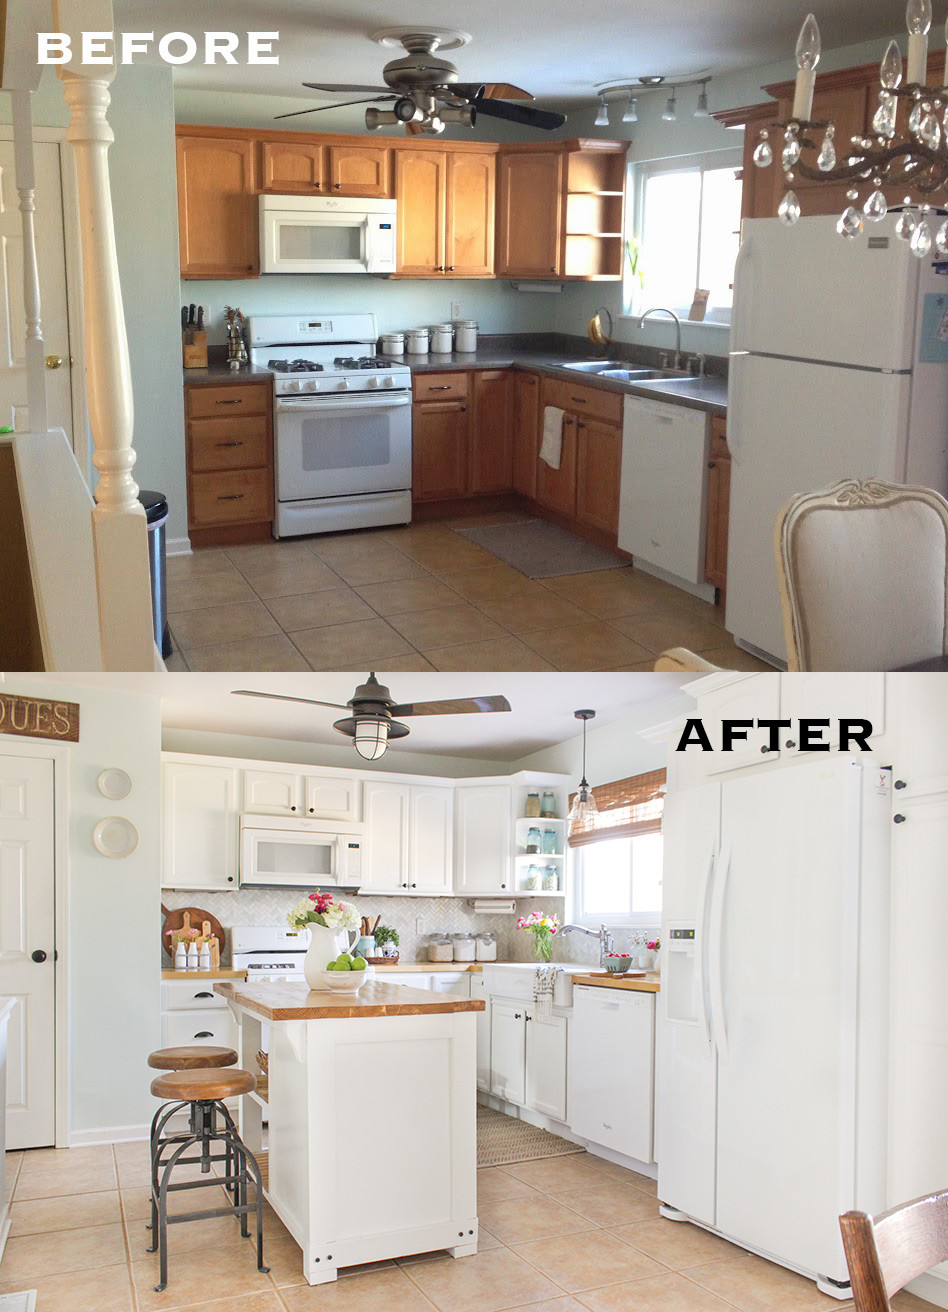 Kitchen Remodel Before And After
 The Kitchen Reveal Shades of Blue Interiors